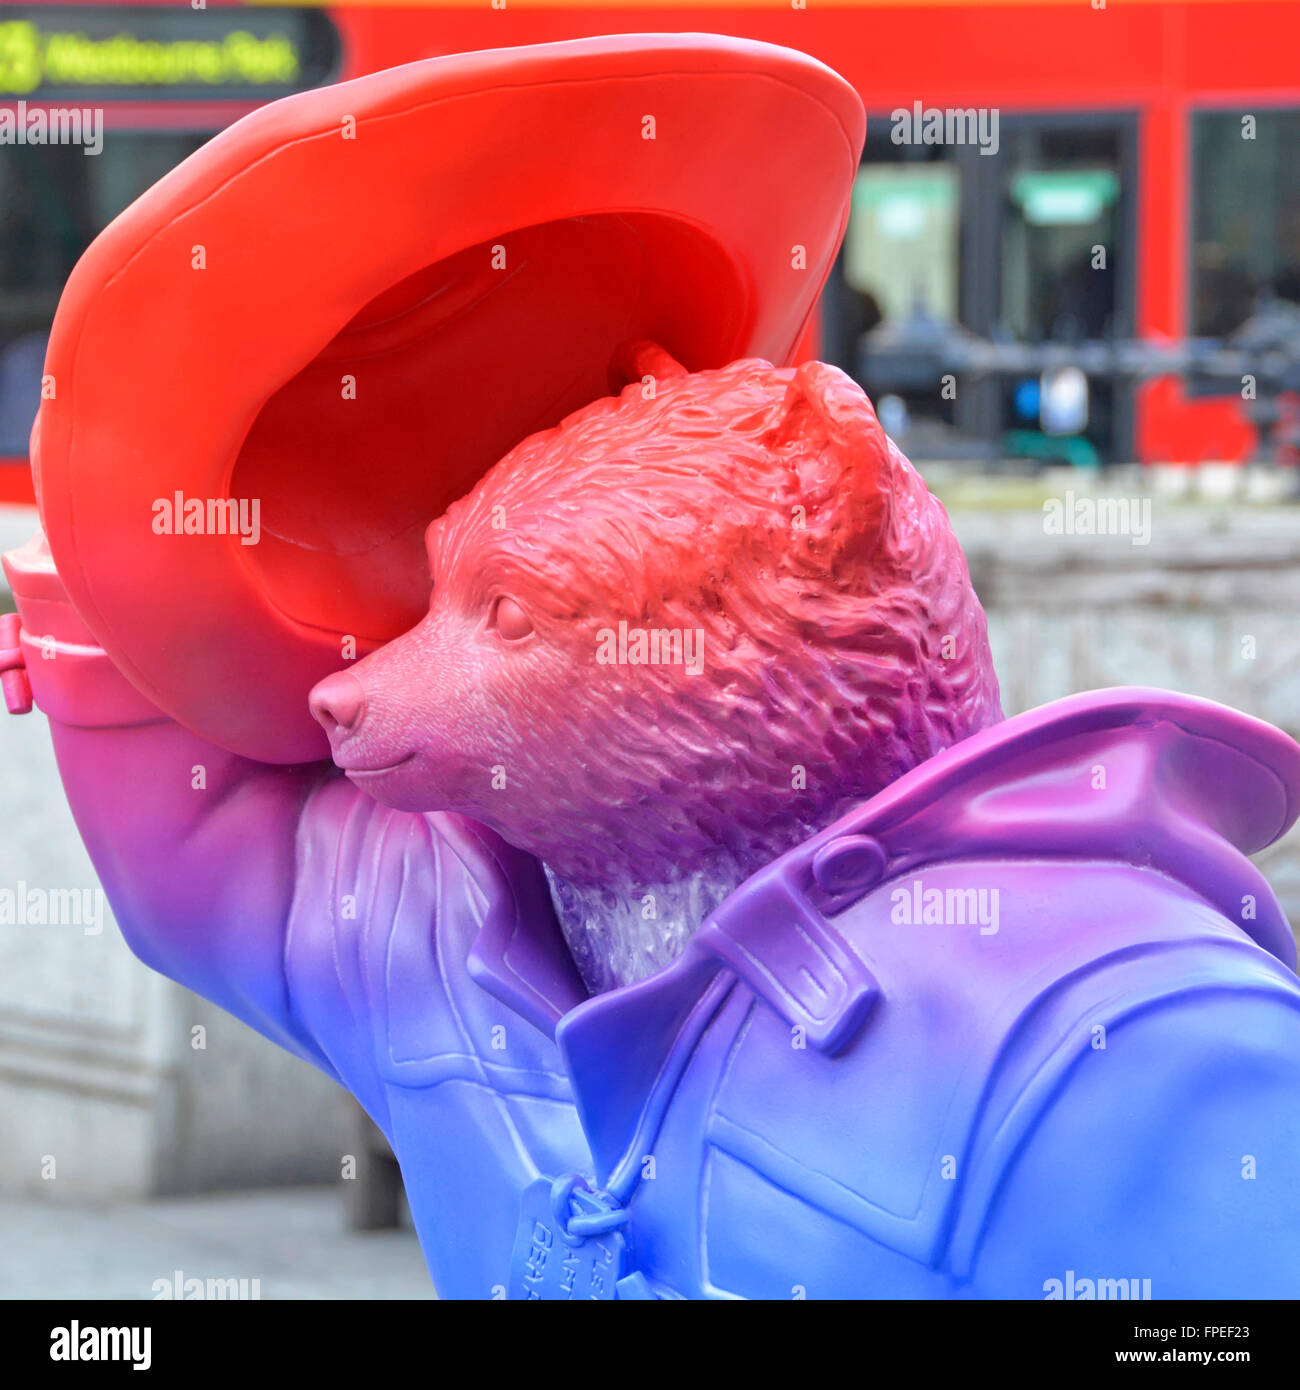 Paddington Bear statue a fictional character in children's literature titled 'R; G; B' designed by Zaha Hadid and on display in central London UK Stock Photo